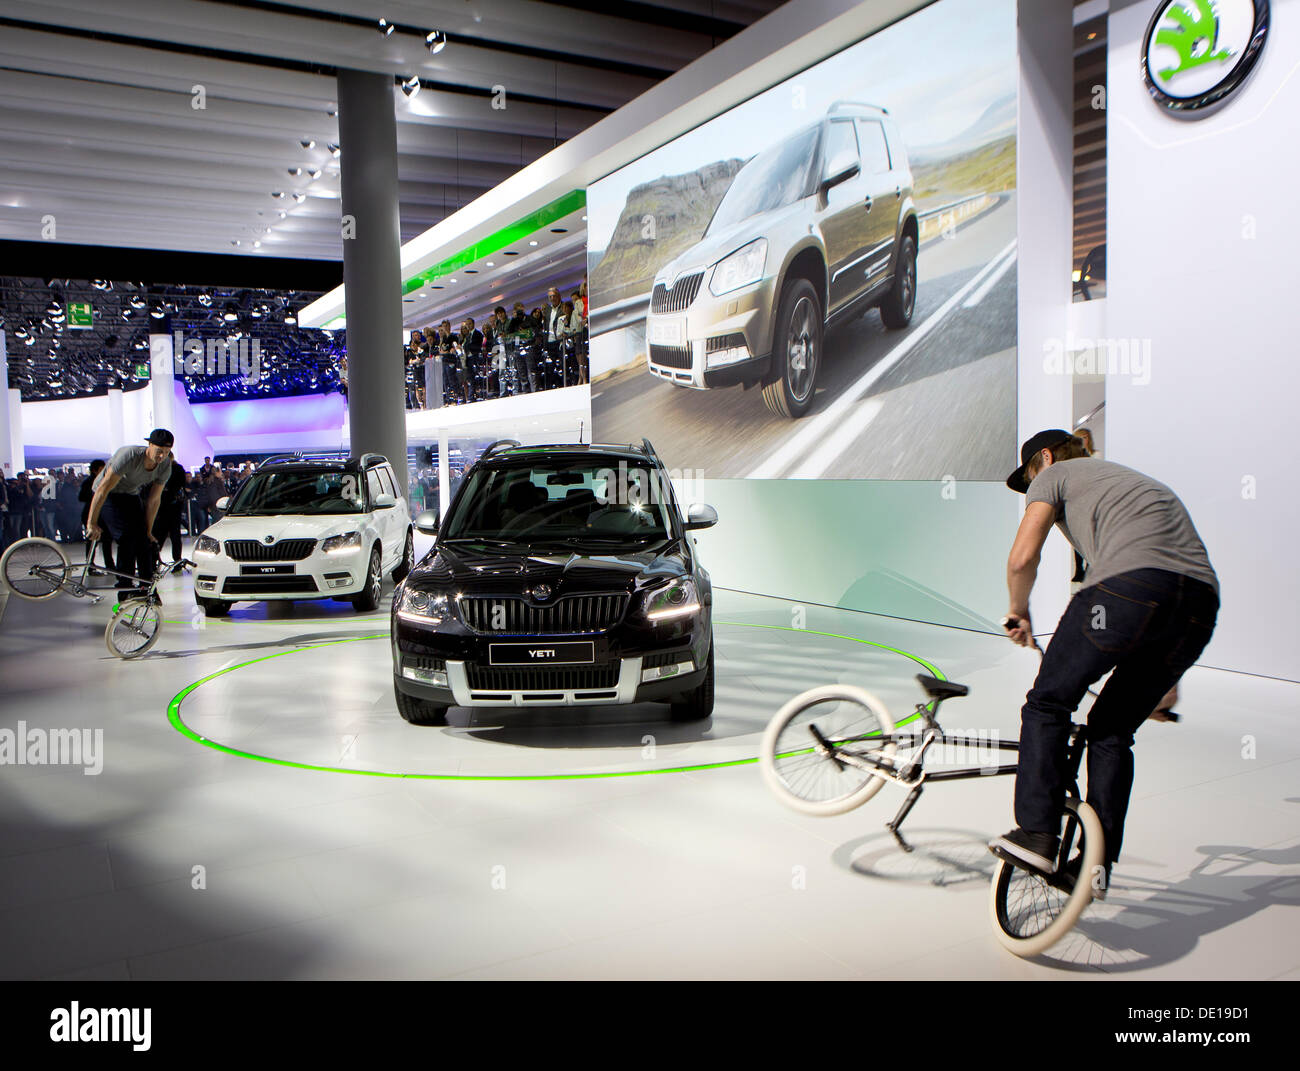 Frankfurt, Germany. 9th Sep, 2013. Skoda Auto carmaker presented in world premiere completely redesigned SUV Skoda Yeti during 65th IAA International Motor Show in Frankfurt/Main, on Tuesday, September 10th, 2013. (CTK Photo/Petr Mlch) Stock Photo